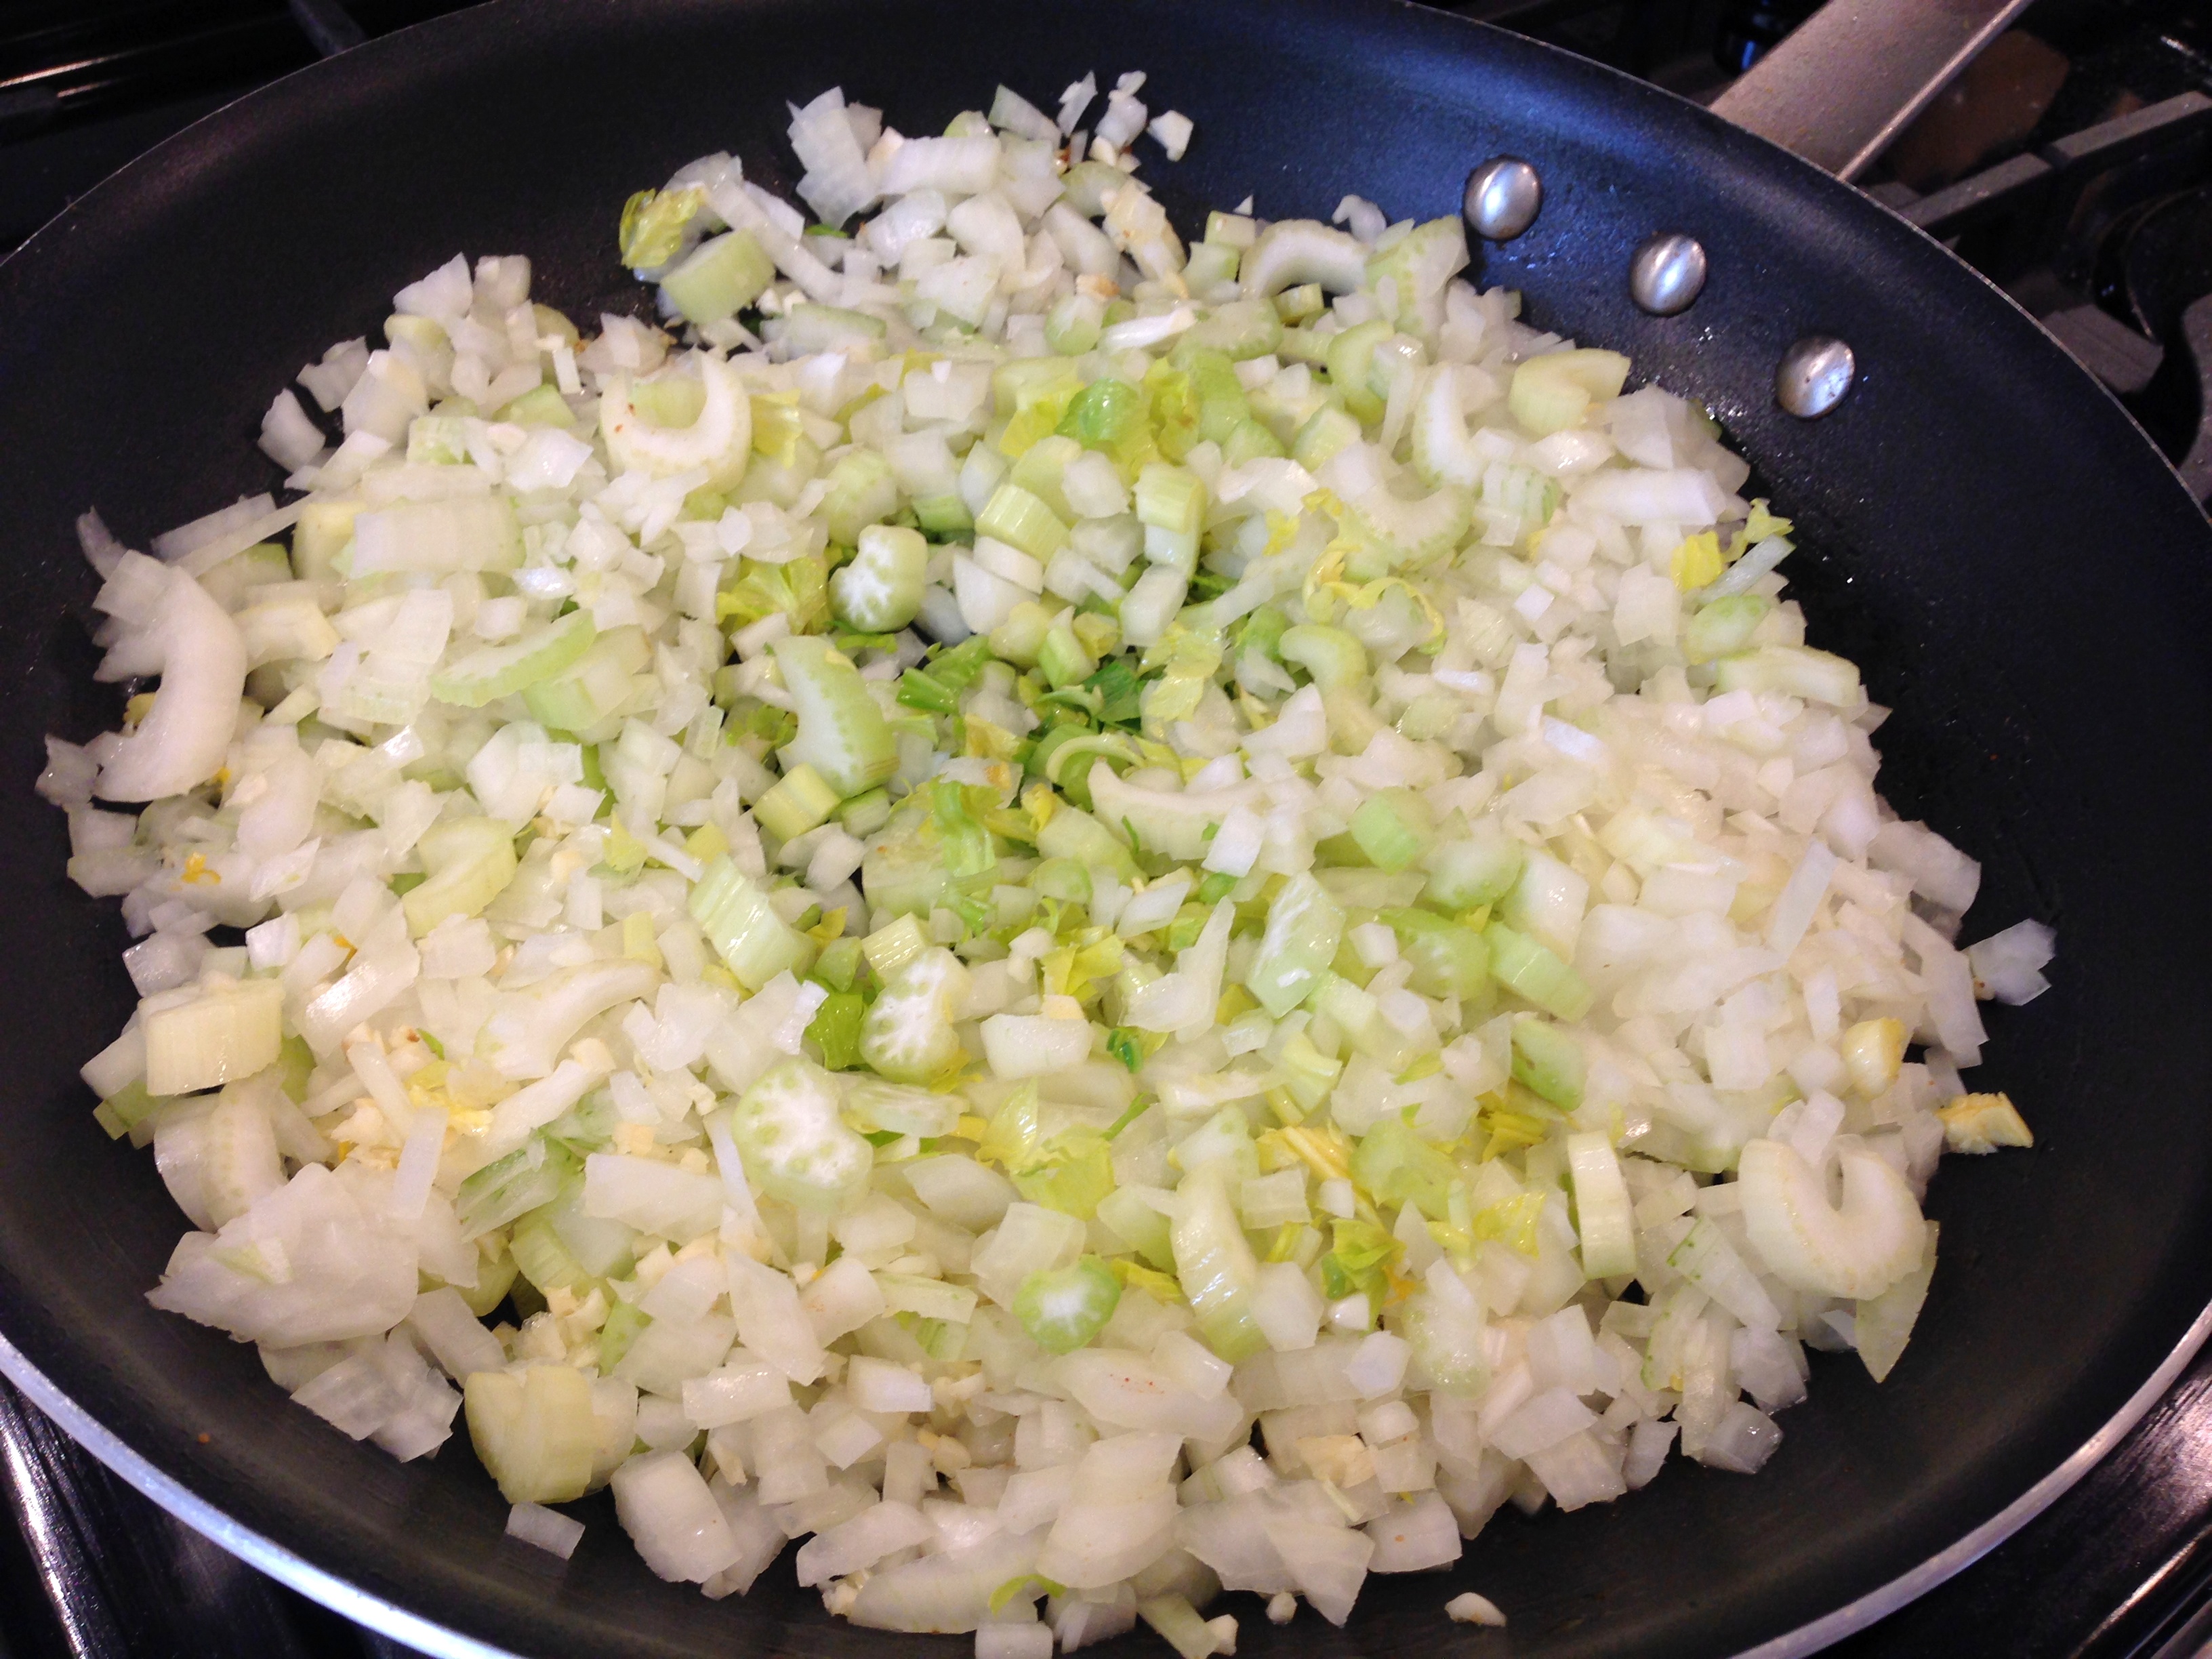 Saute the onions, celery and garlic